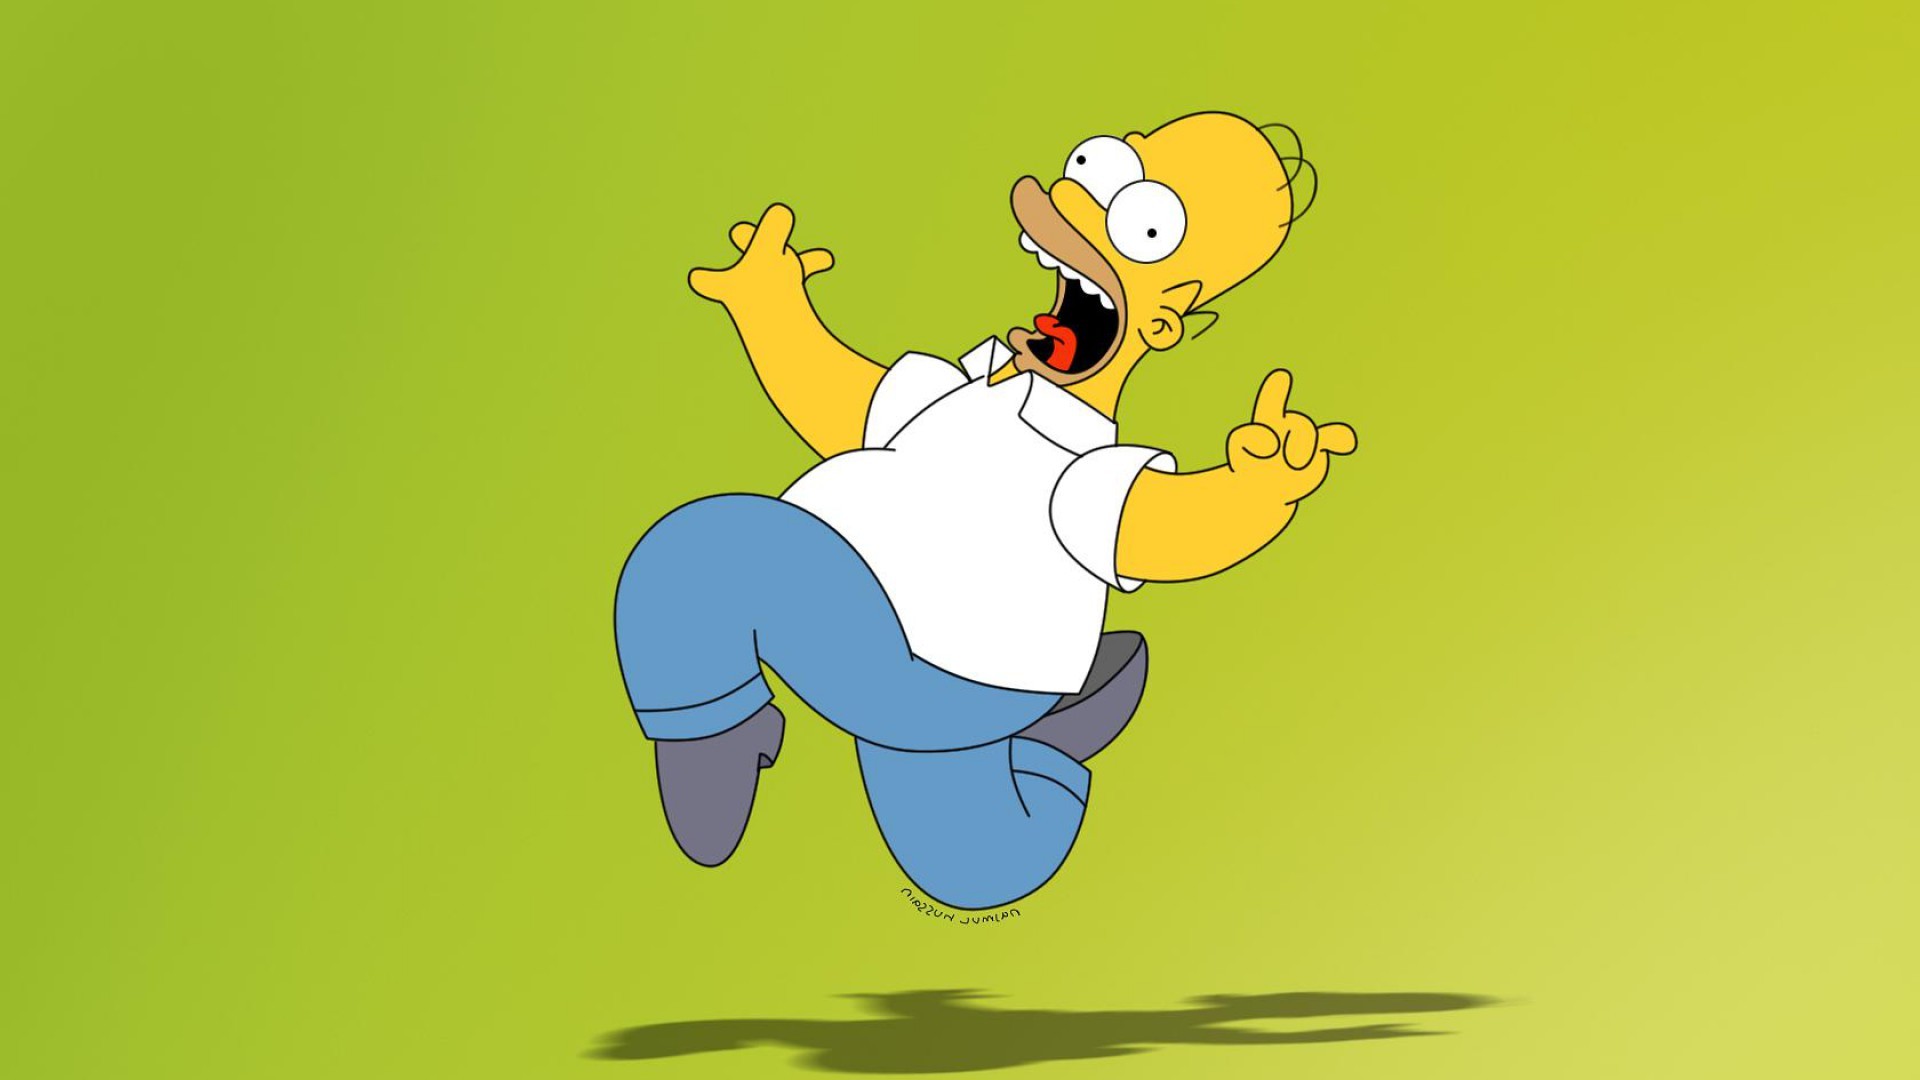 General 1920x1080 Homer Simpson green background simple background cartoon TV series The Simpsons